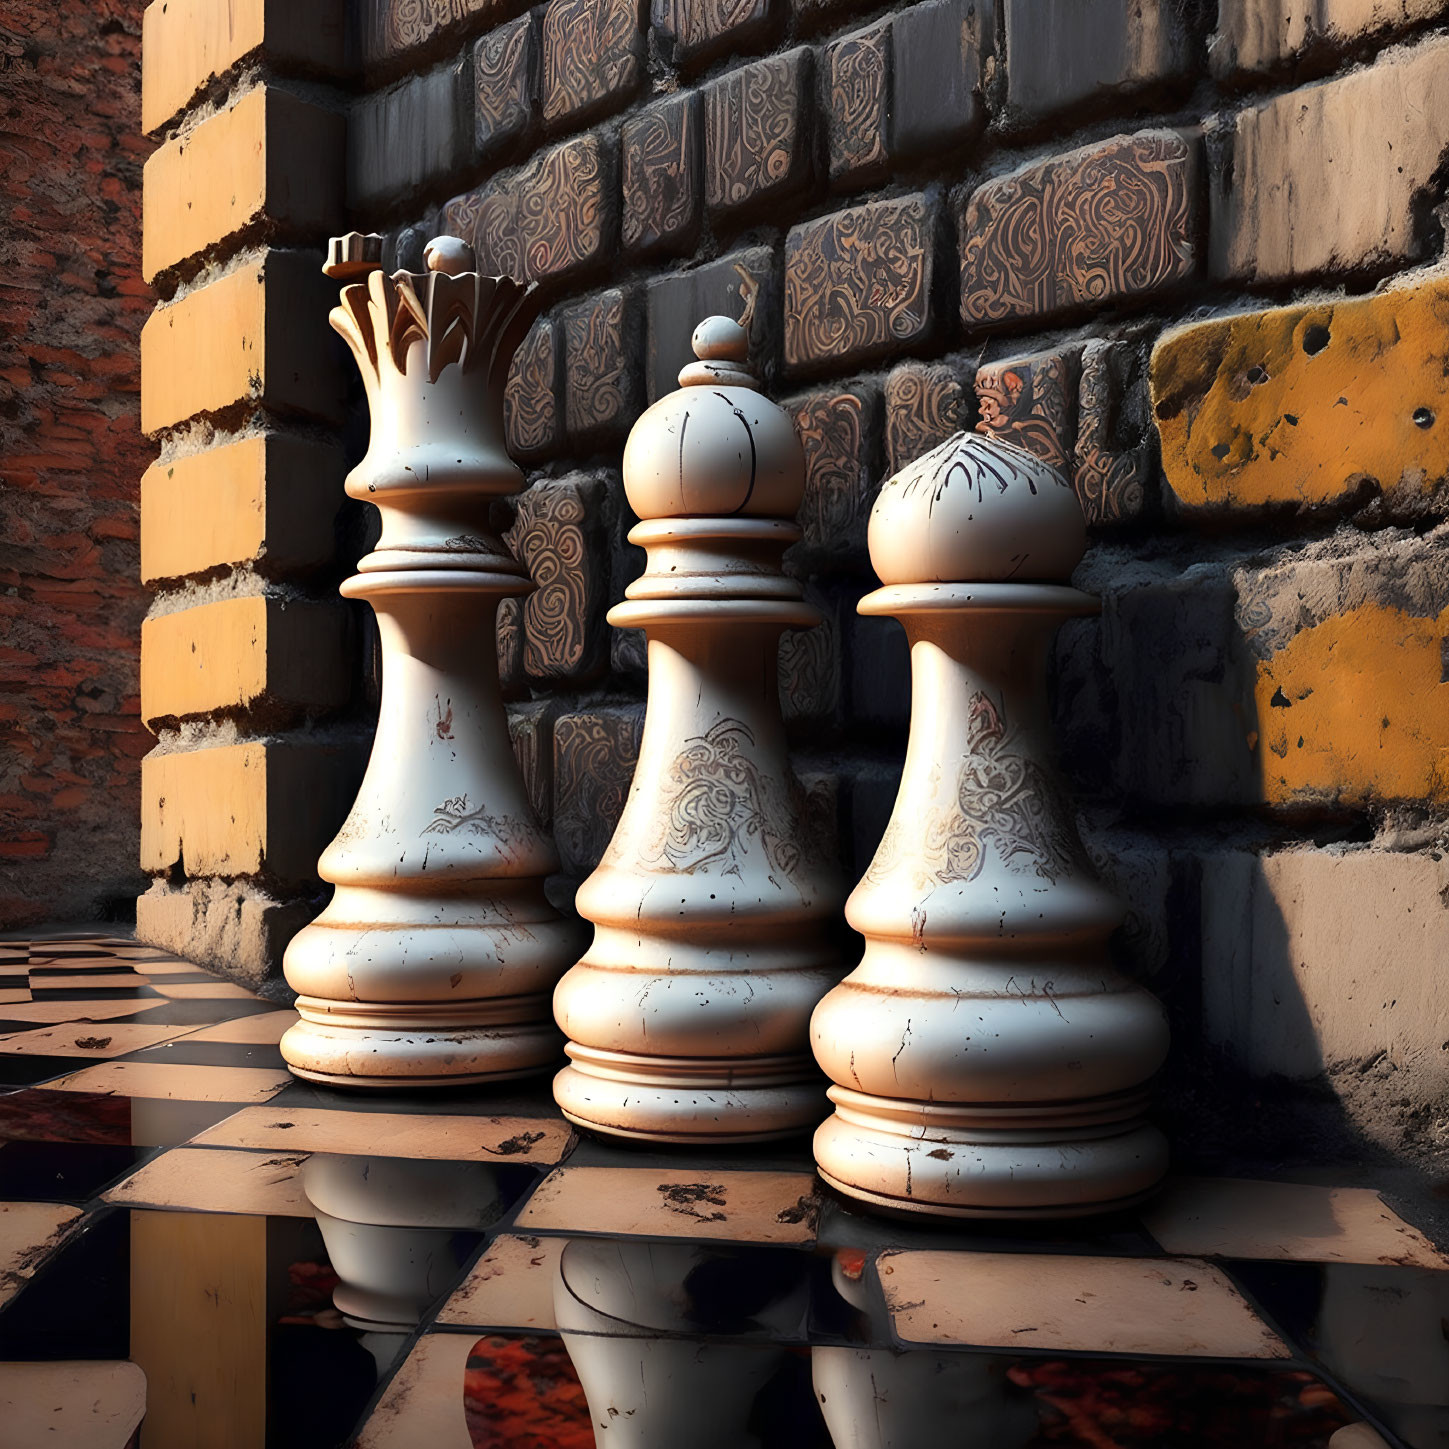 White Chess Queen, Rook, and Bishop on Checkerboard with Brick Wall